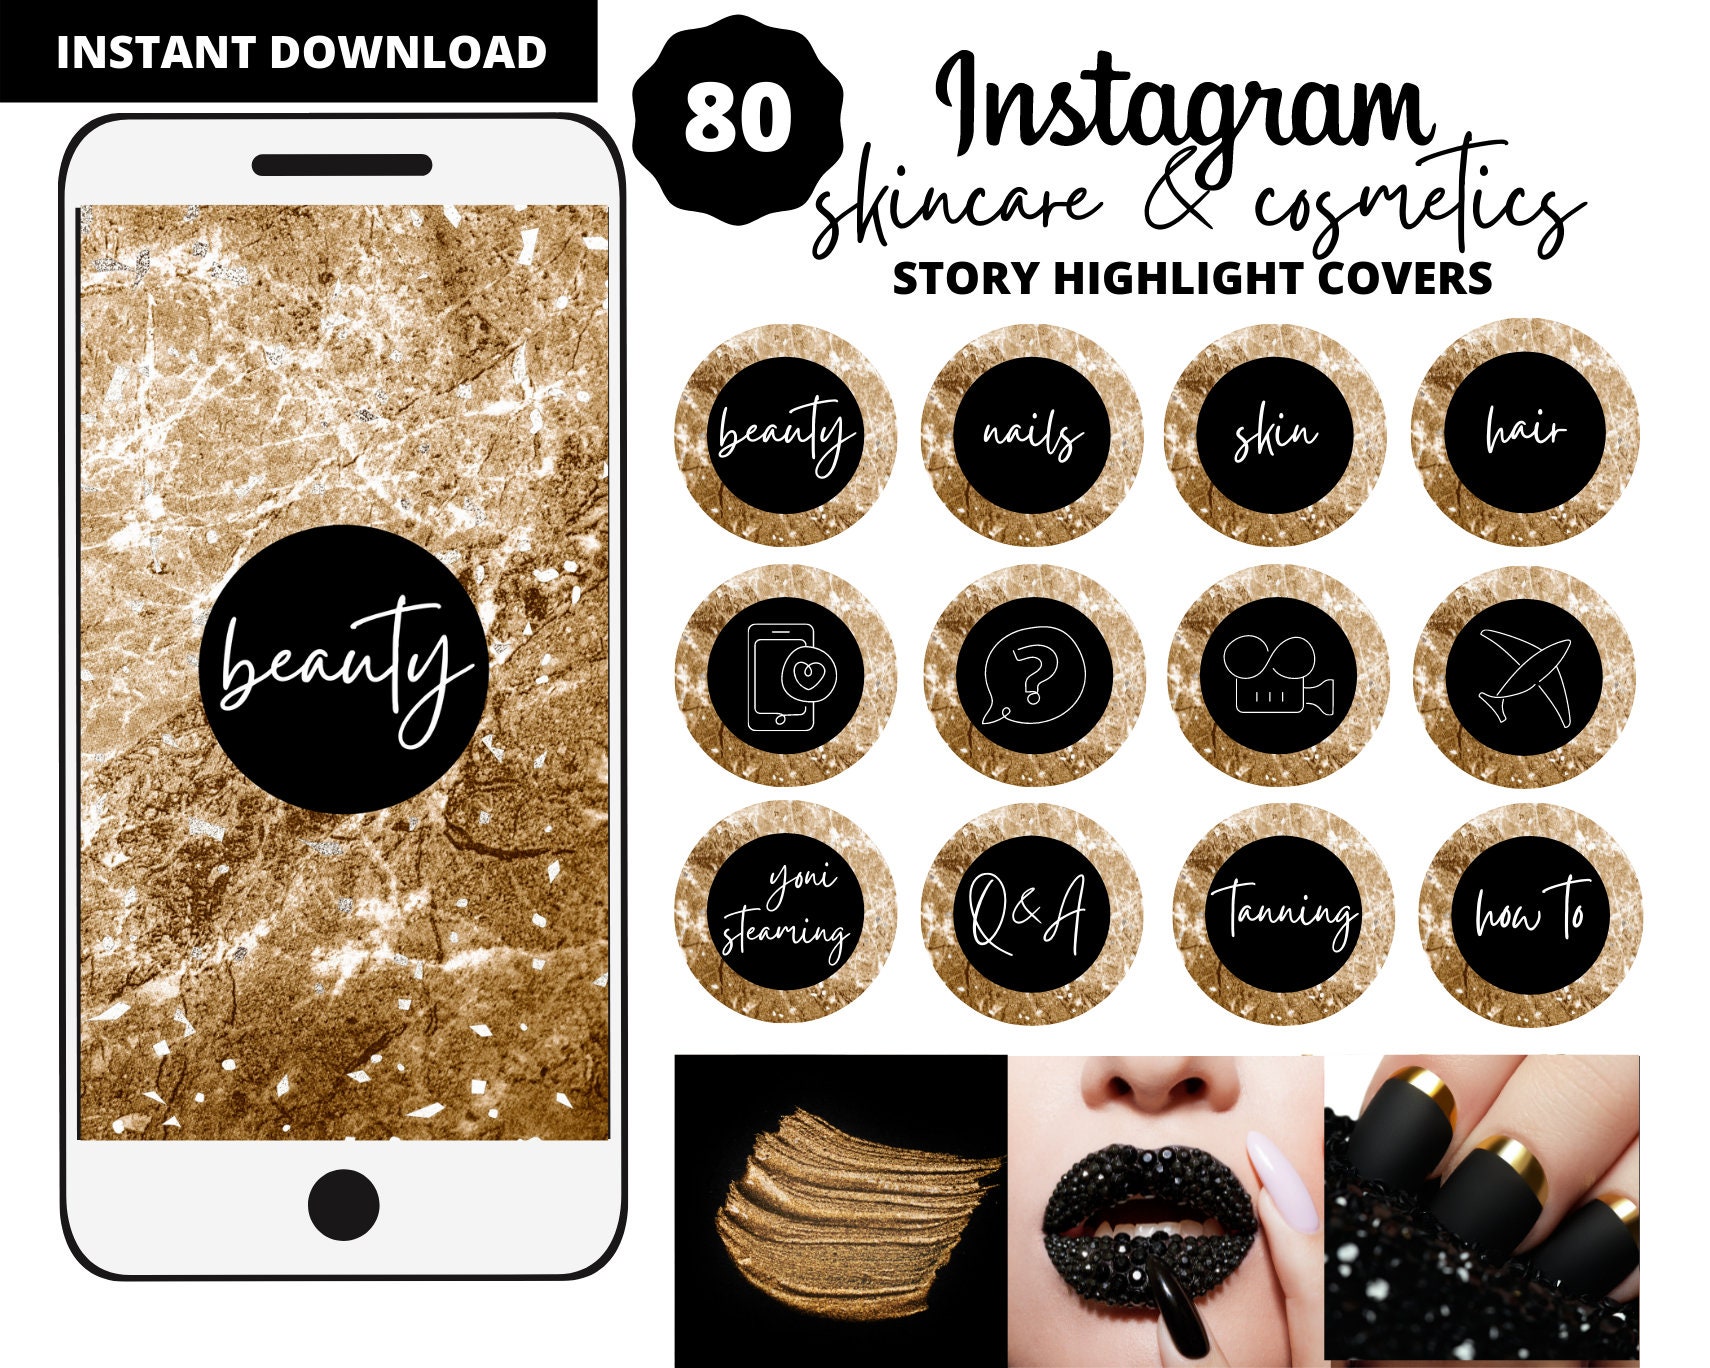 Instagram Story Highlight Covers Cosmetic Highlights Beauty | Etsy